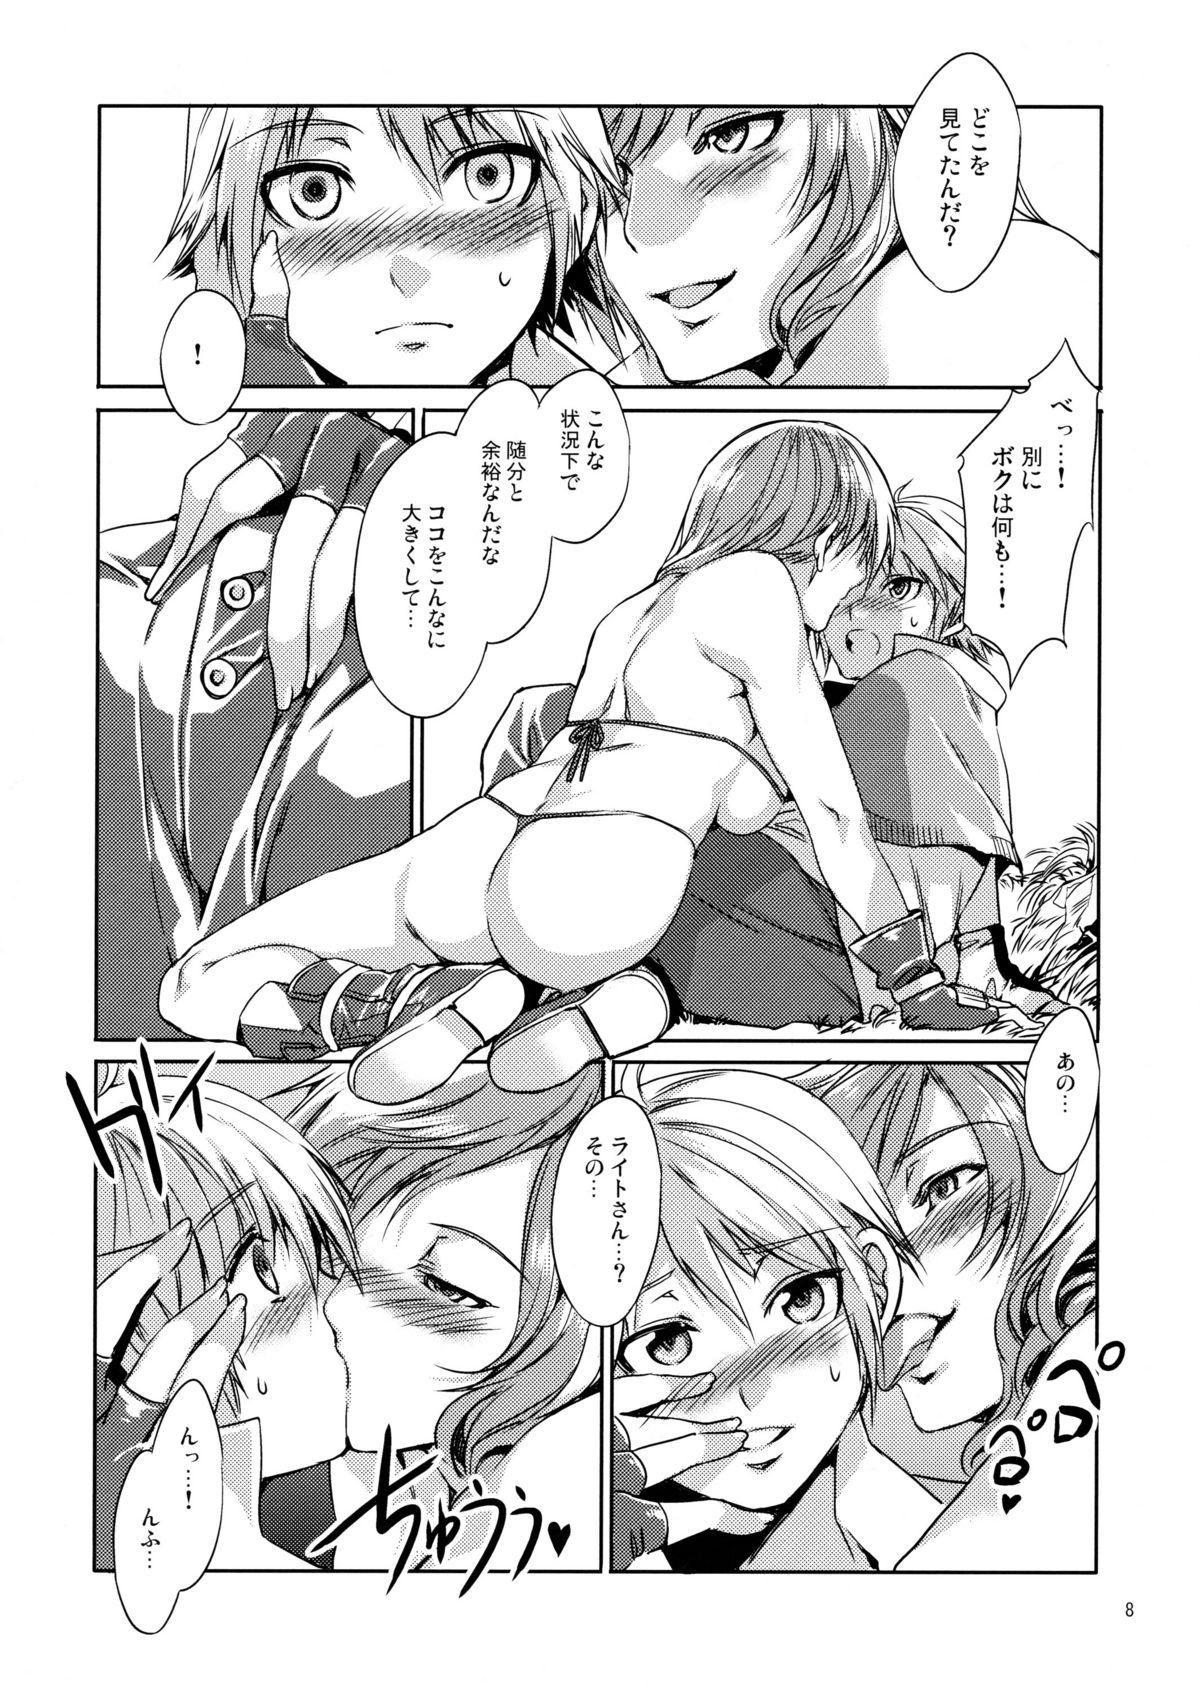 Pervs Kousoku no Imyou wo Motsu Doujinshi | The Doujin Also Known As The Speed Of Light - Final fantasy xiii Real Couple - Page 7